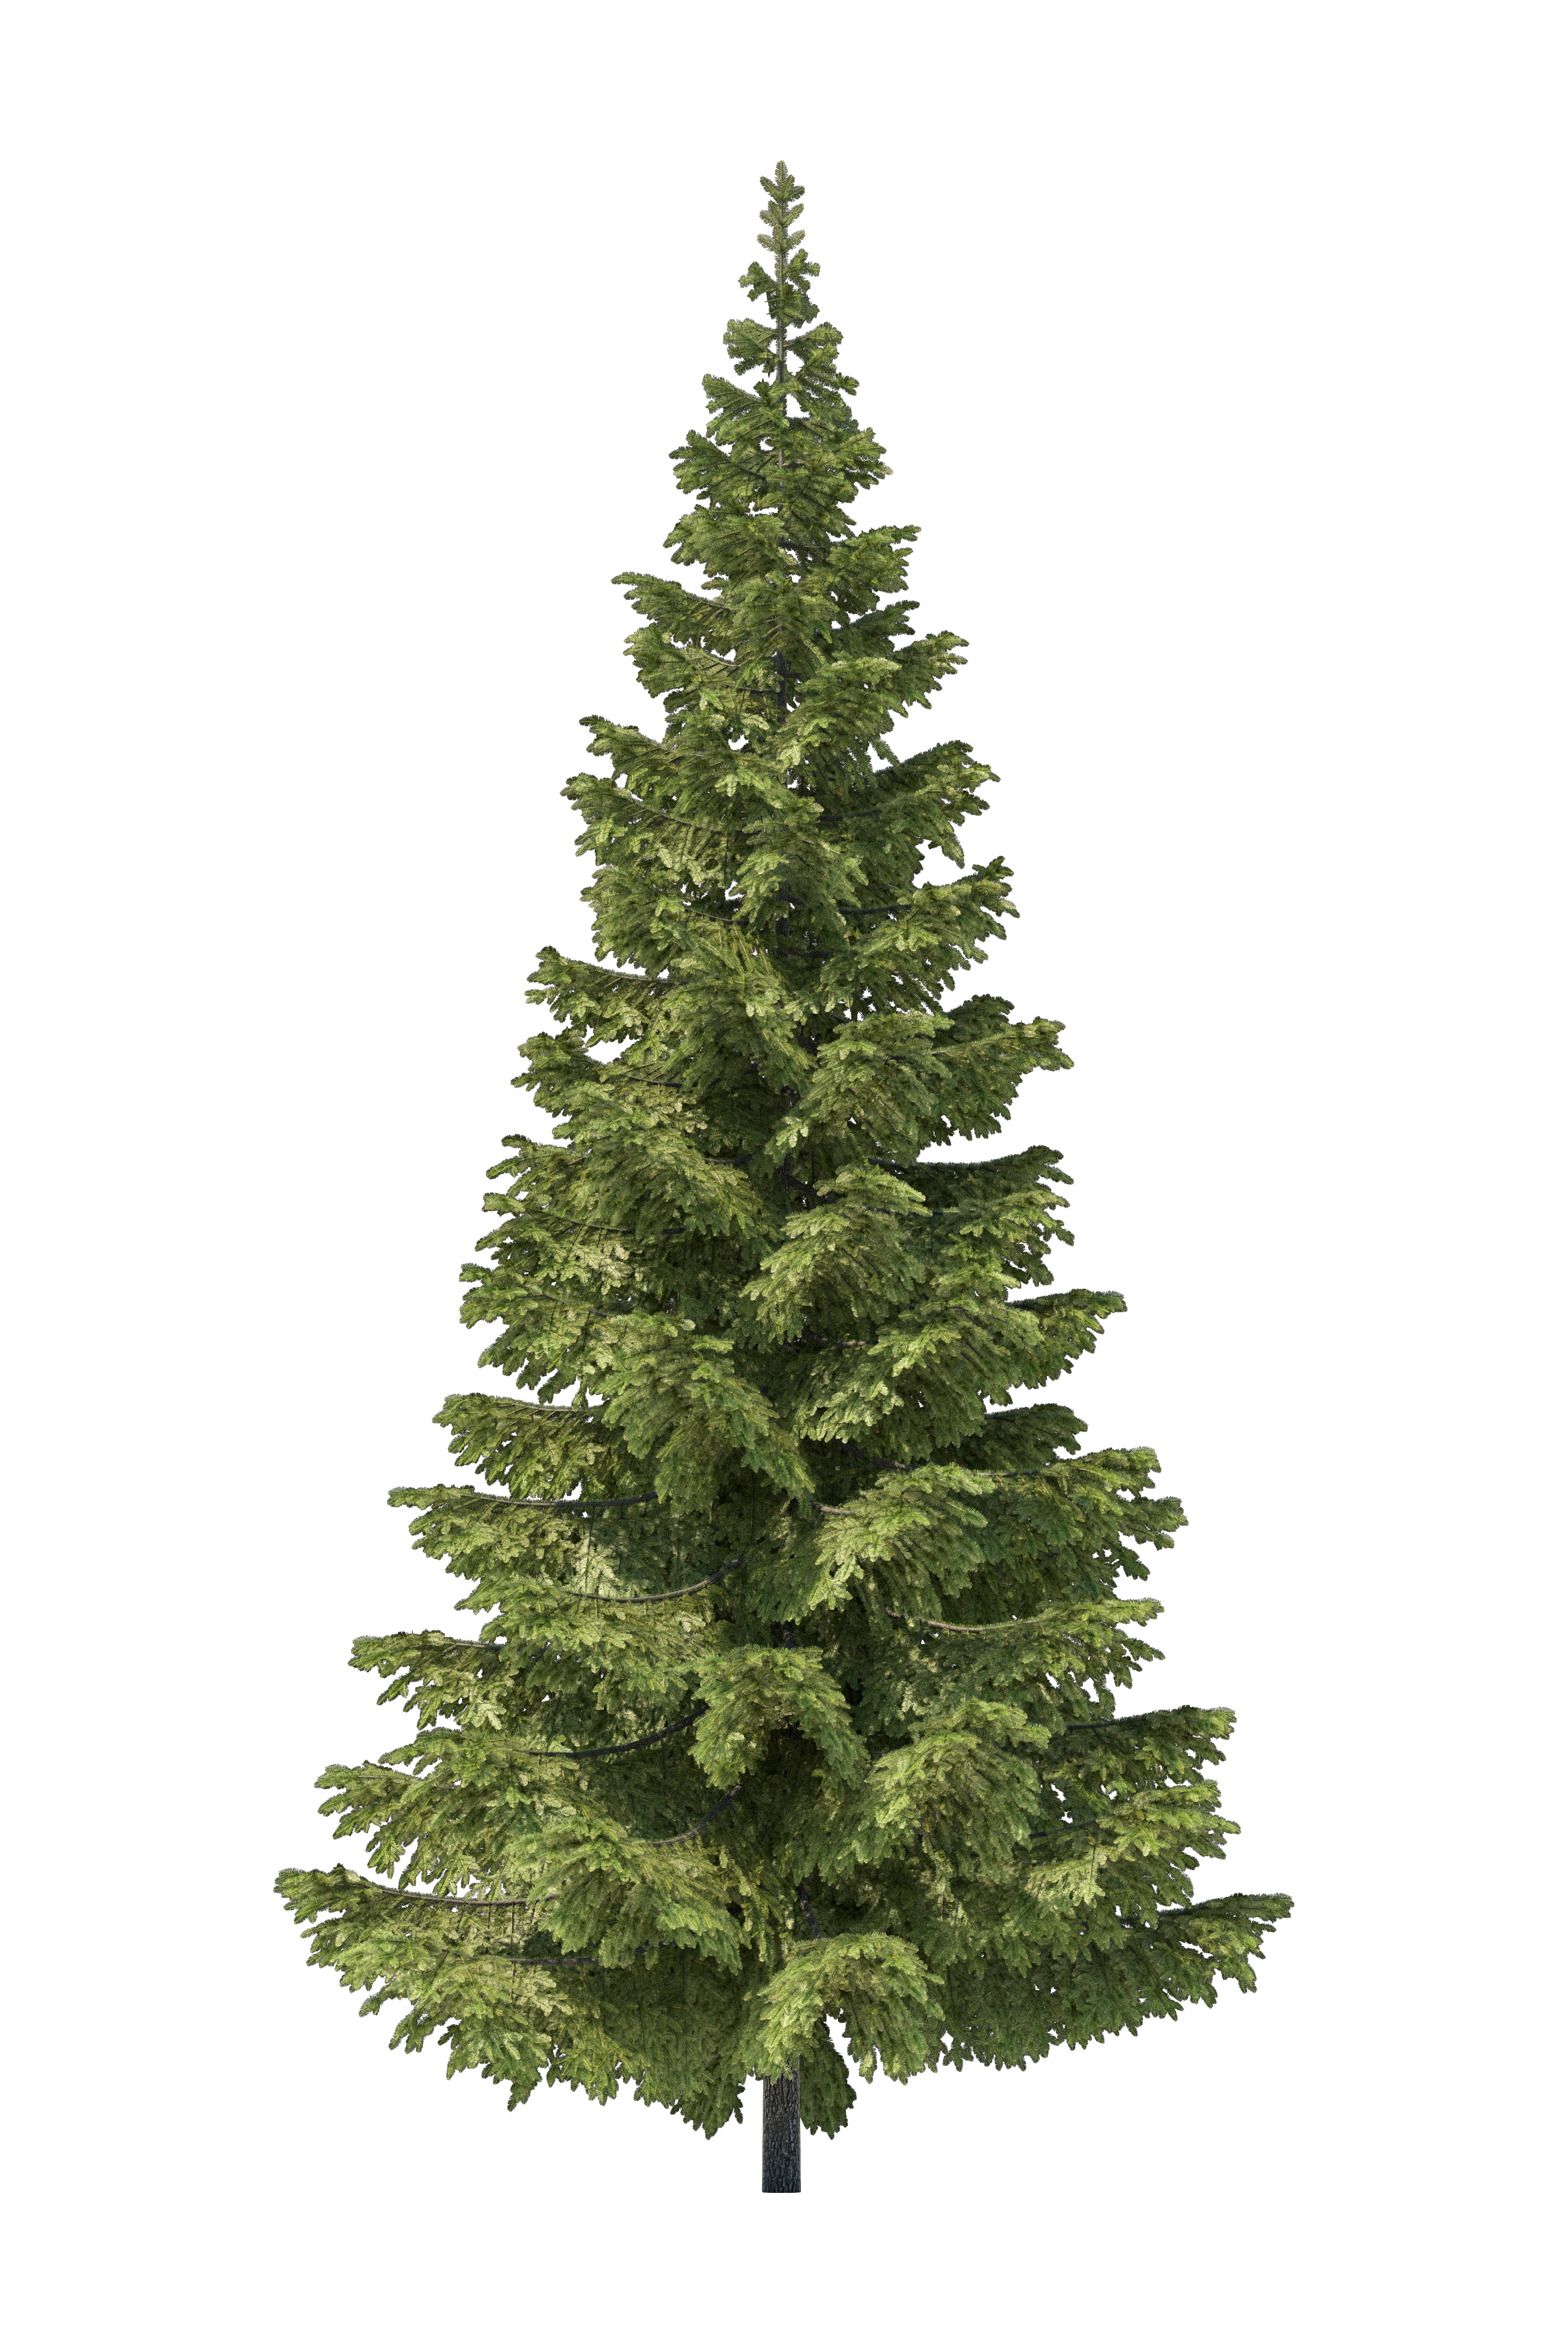 Spruce tree without decorations